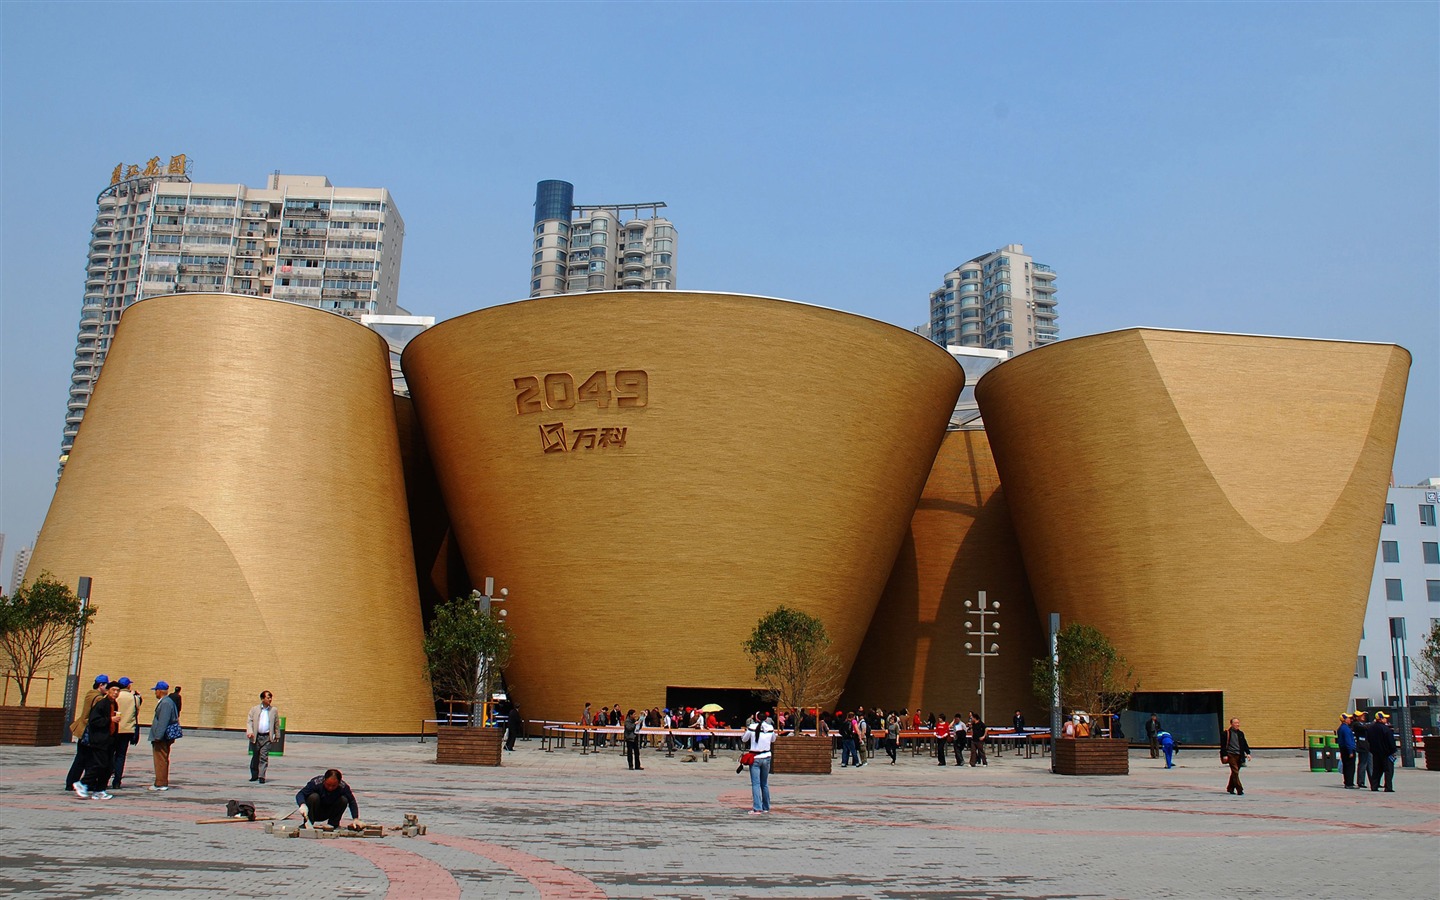 Commissioning of the 2010 Shanghai World Expo (studious works) #17 - 1440x900